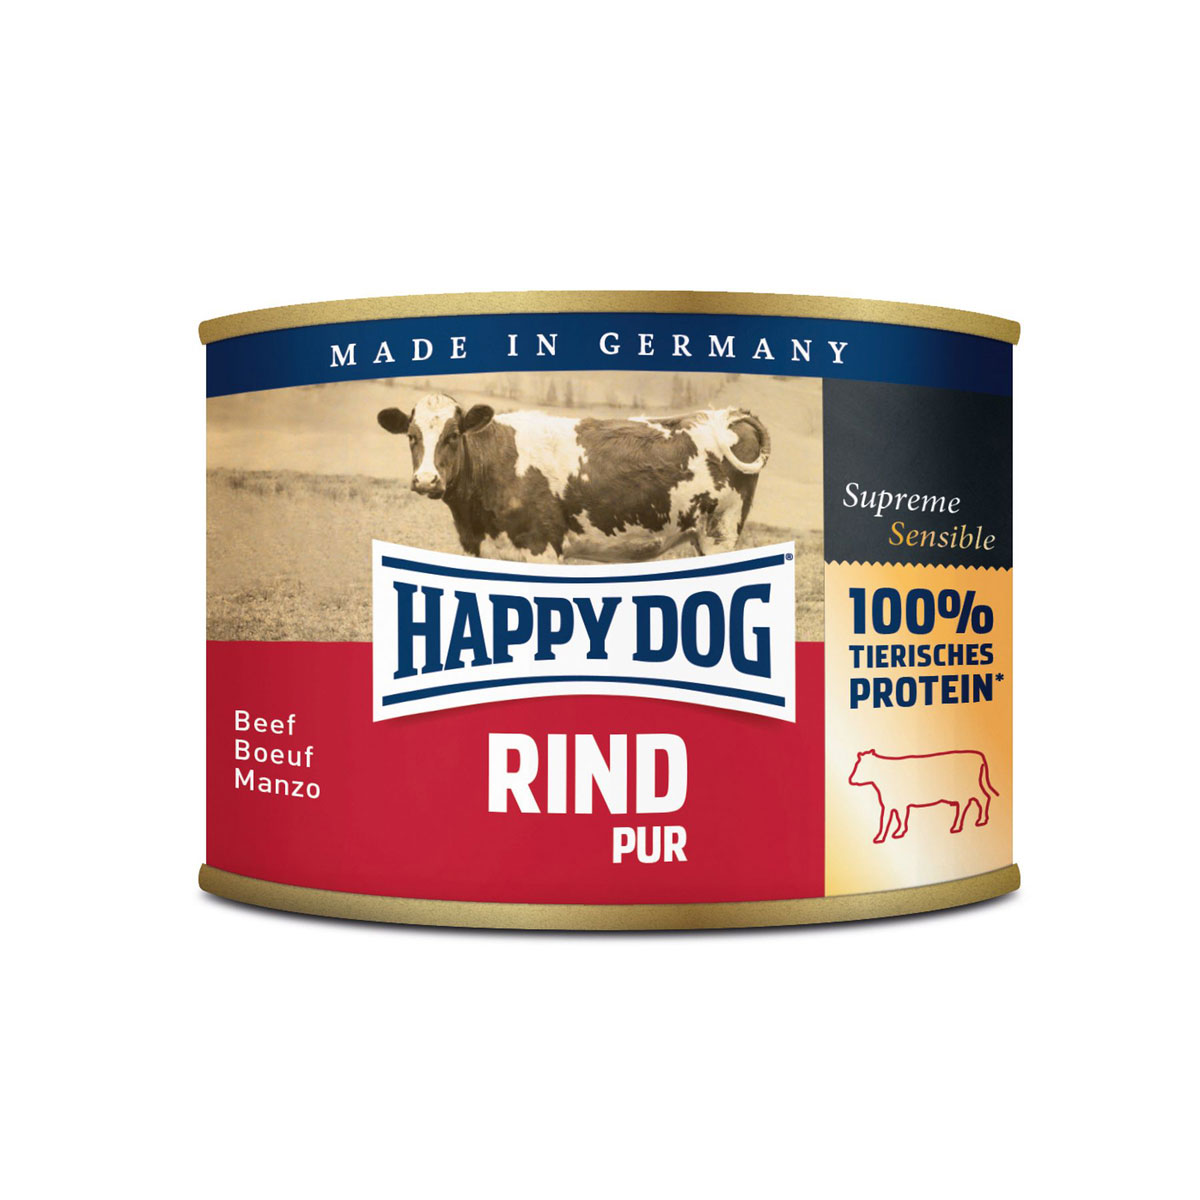 Dose Rind Pur 200g